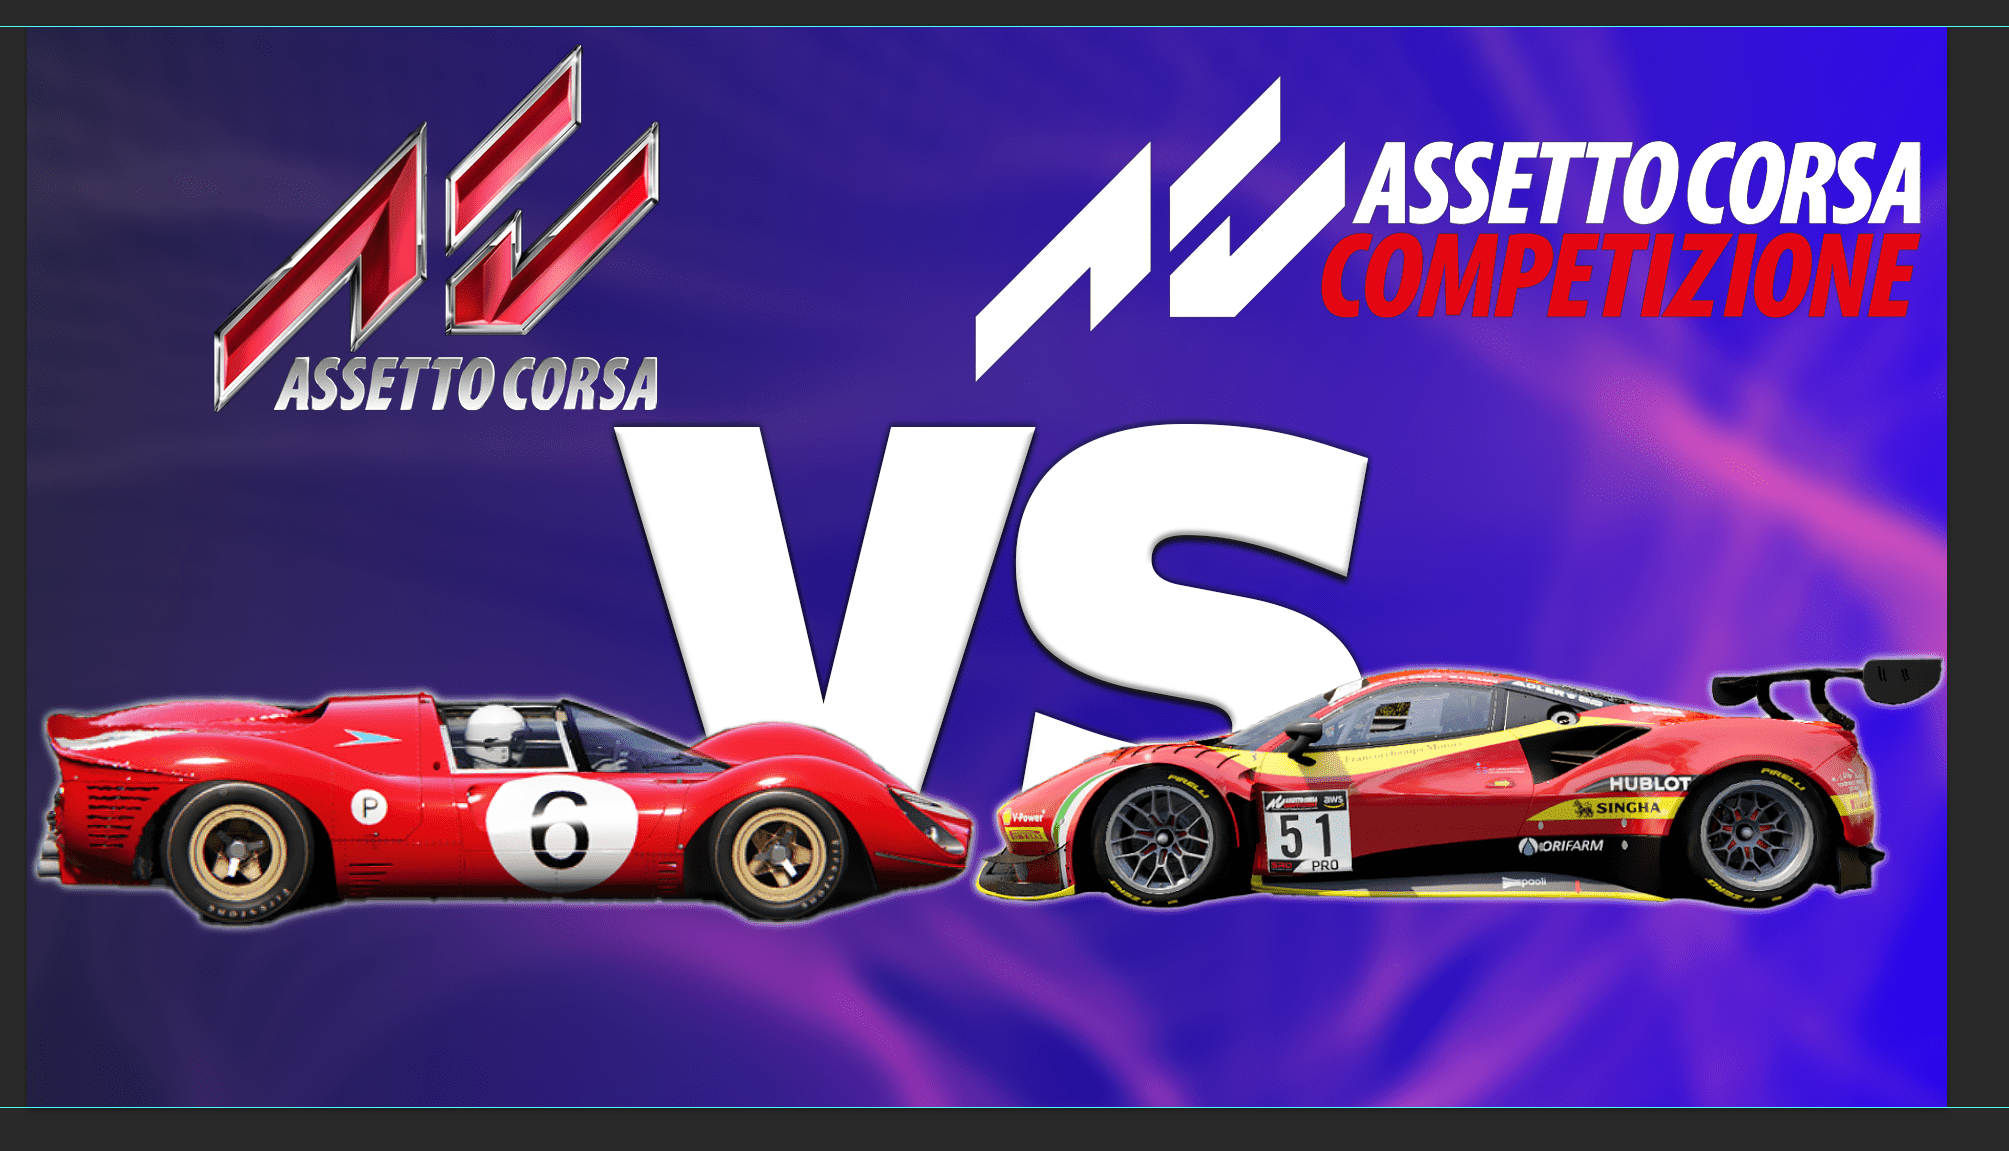 The difference between Assetto Corsa and Assetto Corsa